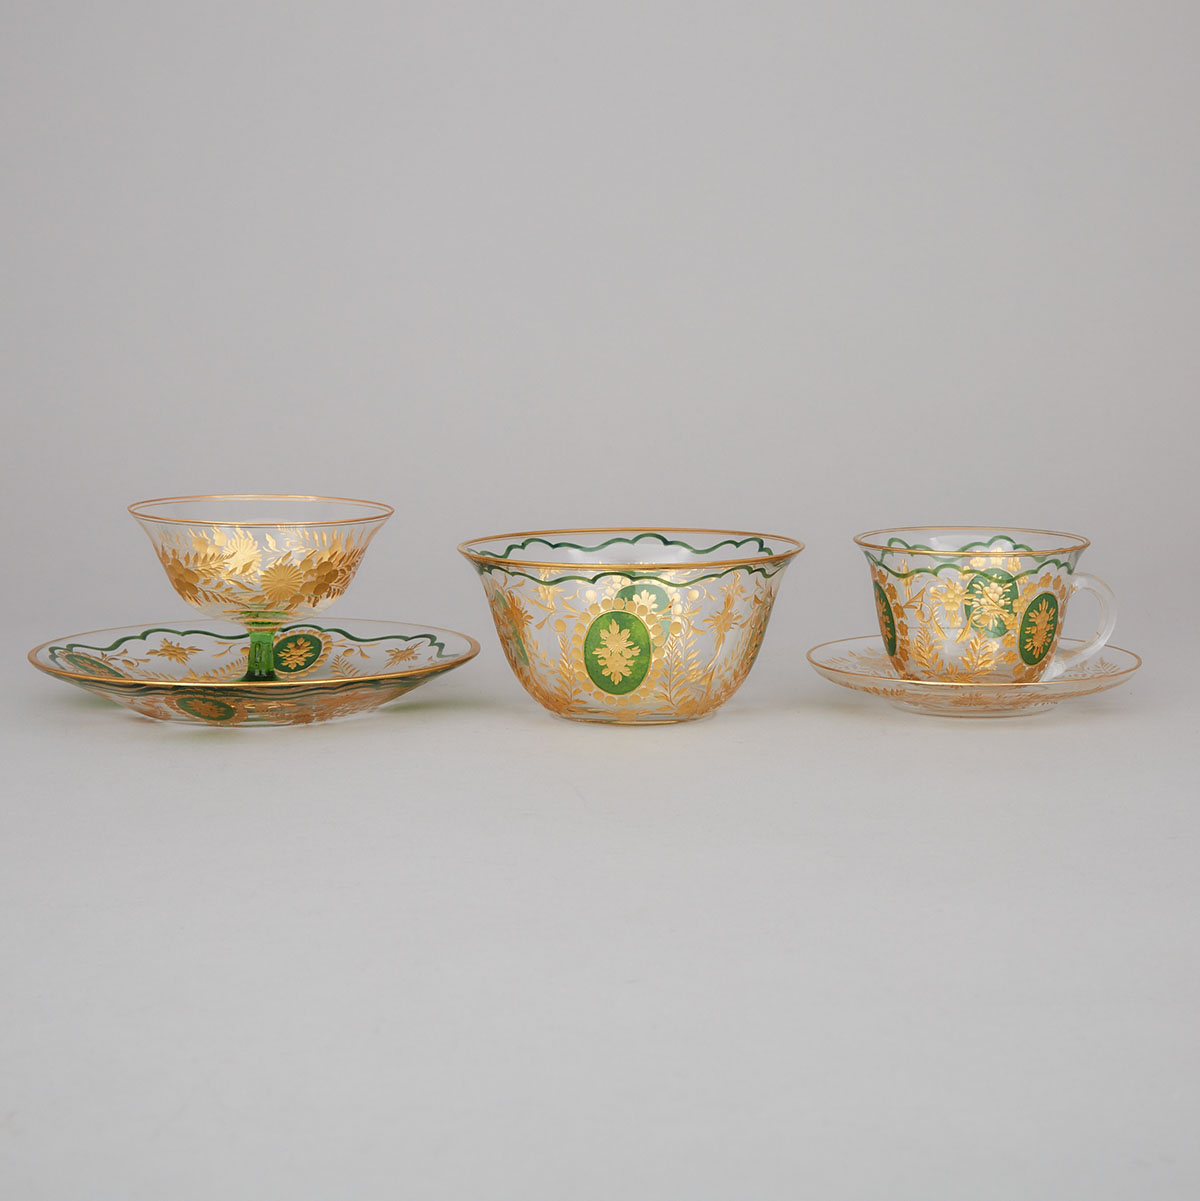 Bohemian Engraved, Green Enameled and Gilt Glass Service, early 20th century